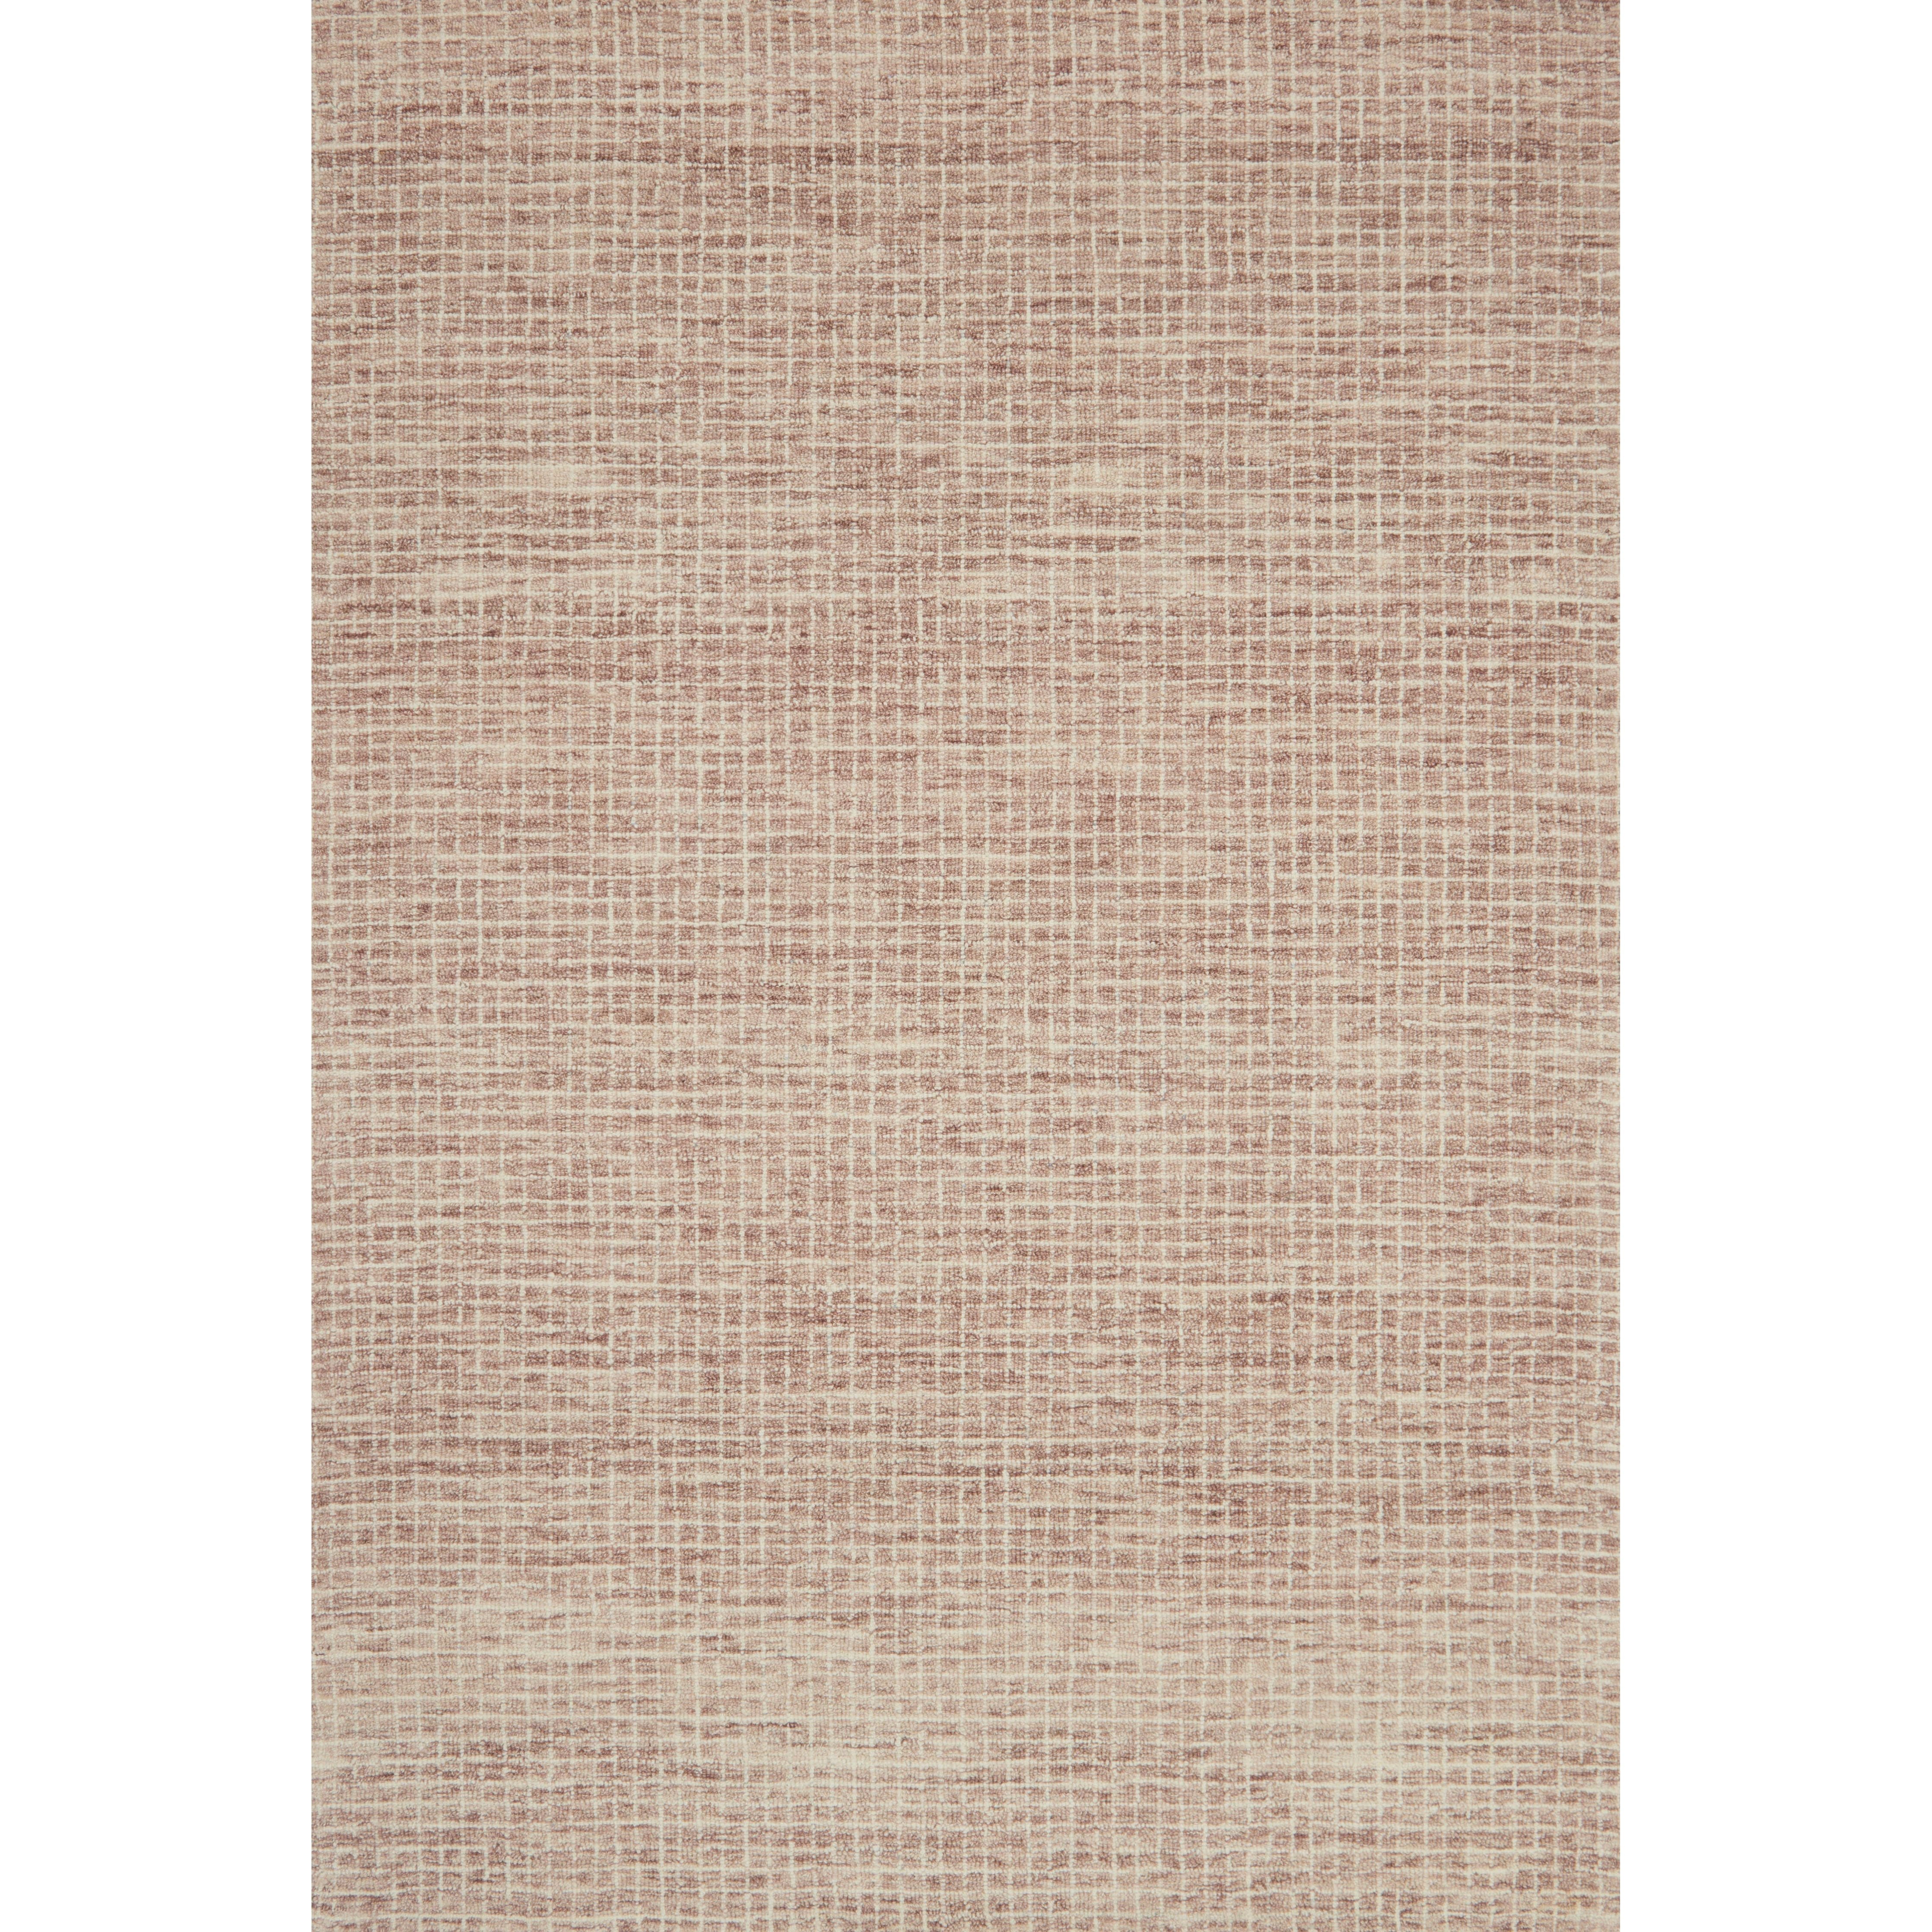 The Giana Blush Area Rug, or GH-01, by Loloi combines a relaxed grid with soft variations of cream and blush for an effortless and sophisticated look. Each area rug is hooked of 100% wool by artisans for a beautiful textural layer to your home. The soft textures of this area rug bring warmth and coziness to any room.